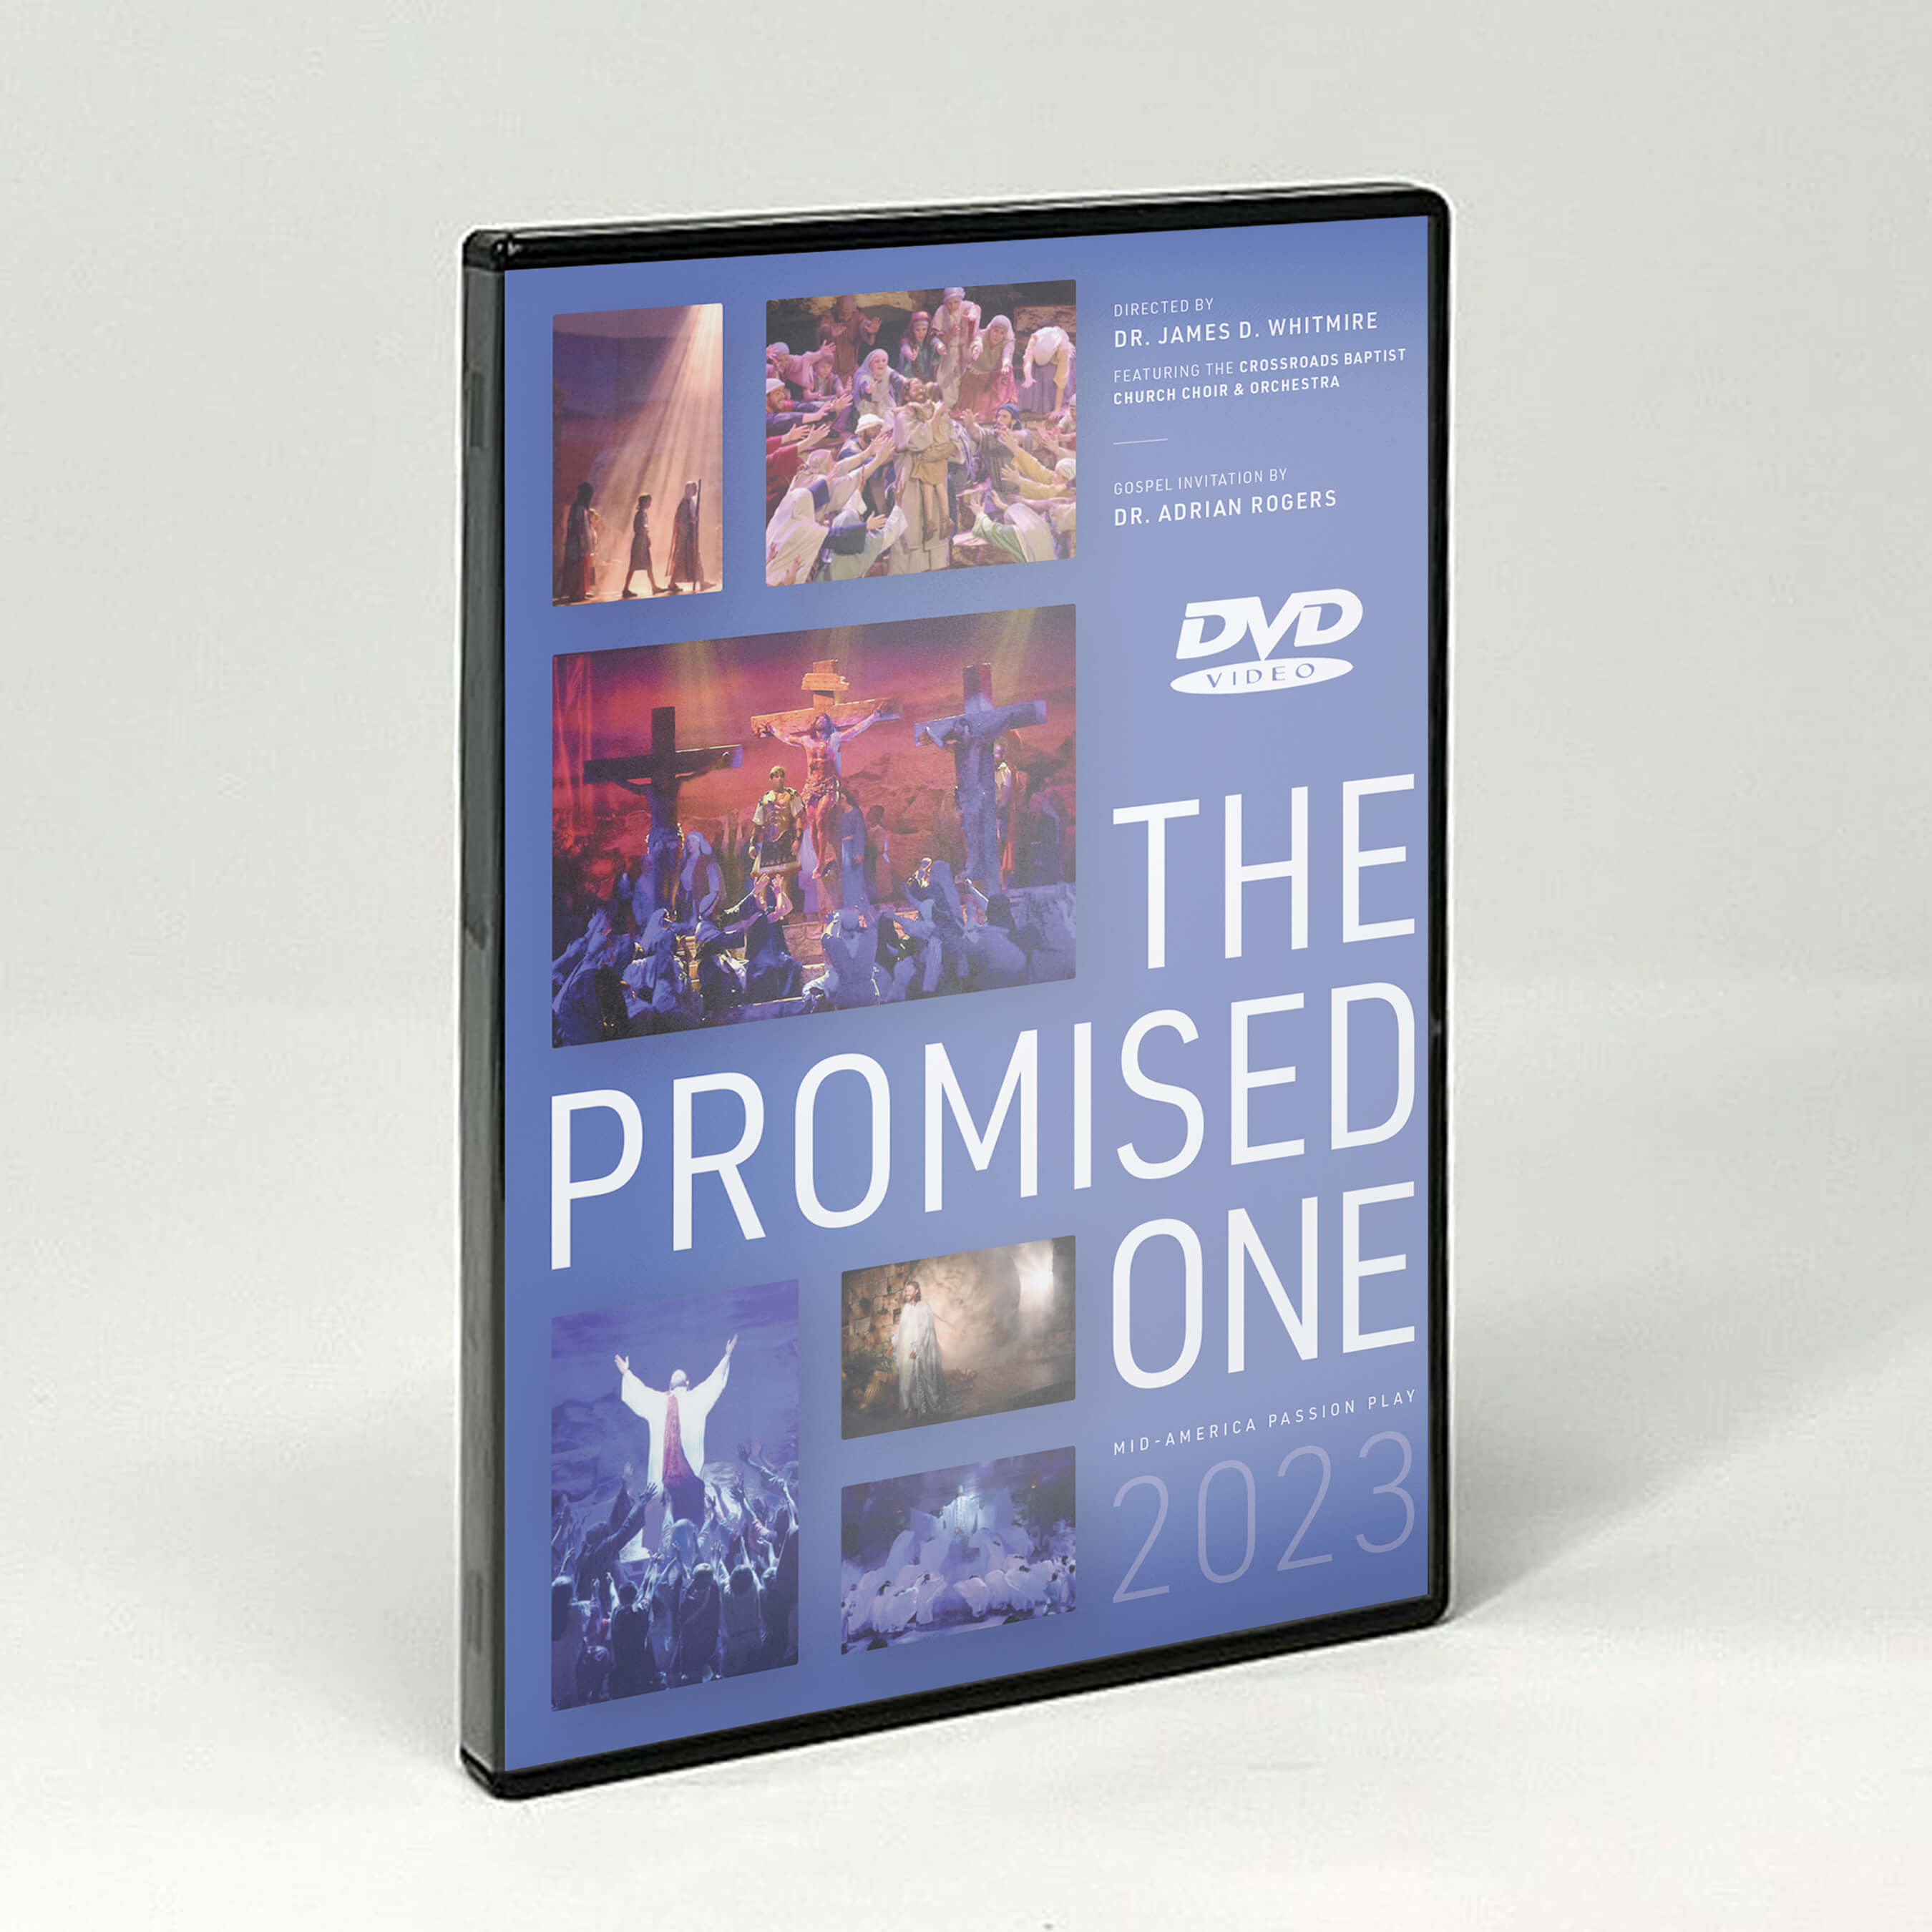 Mid America Passion Play: The Promised One